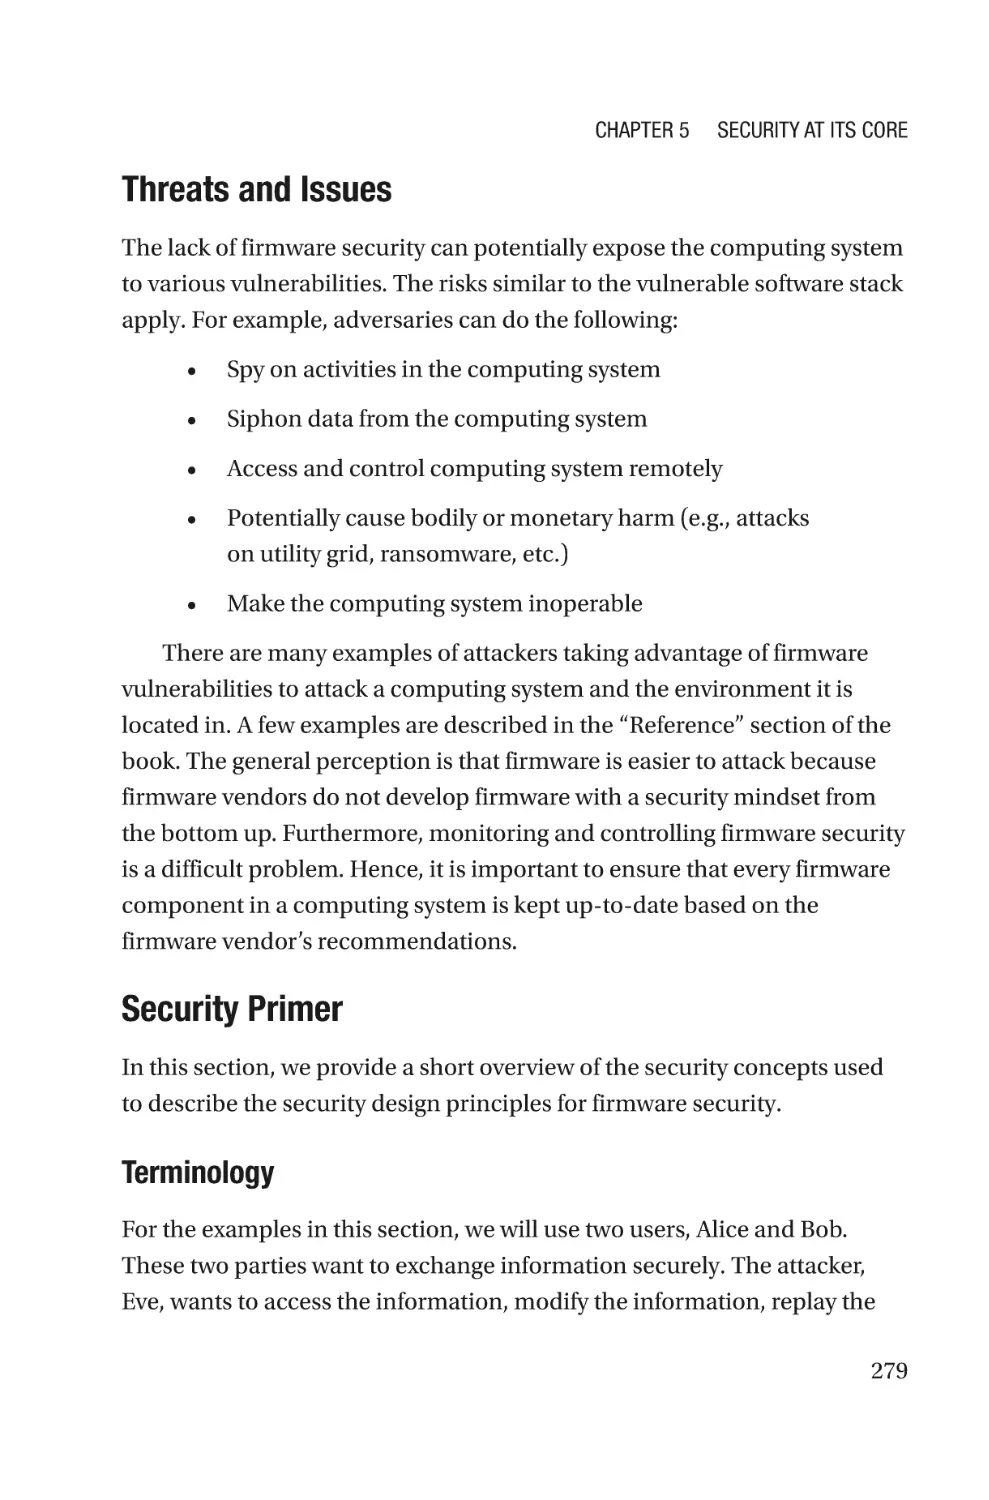 Threats and Issues
Security Primer
Terminology